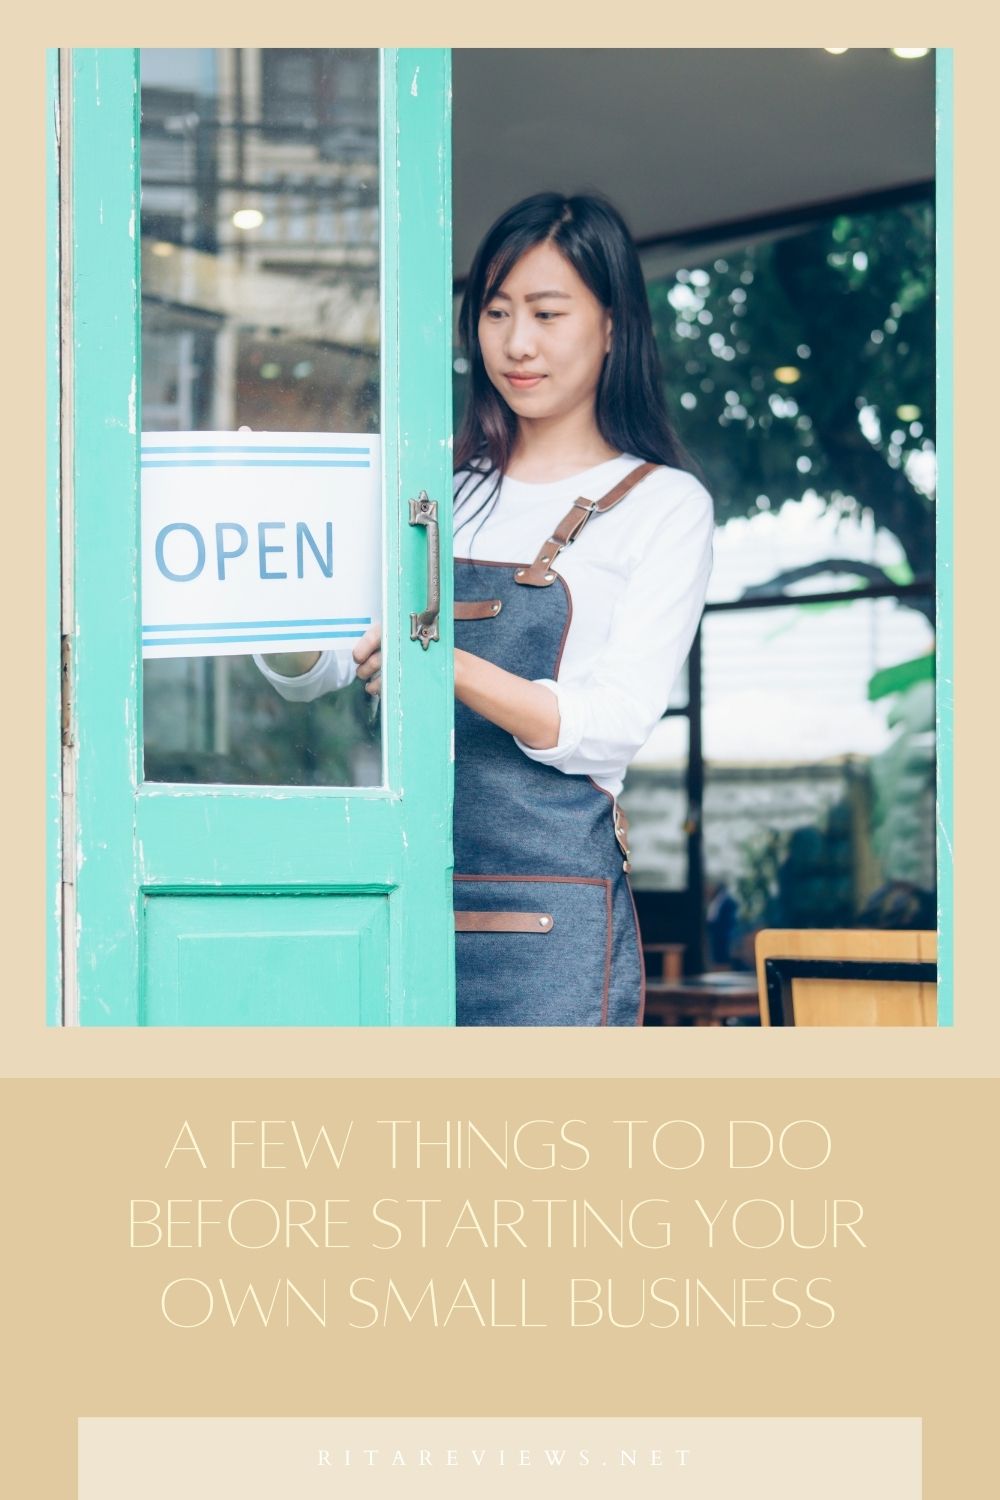 A Few Things to Do Before Starting Your Own Small Business